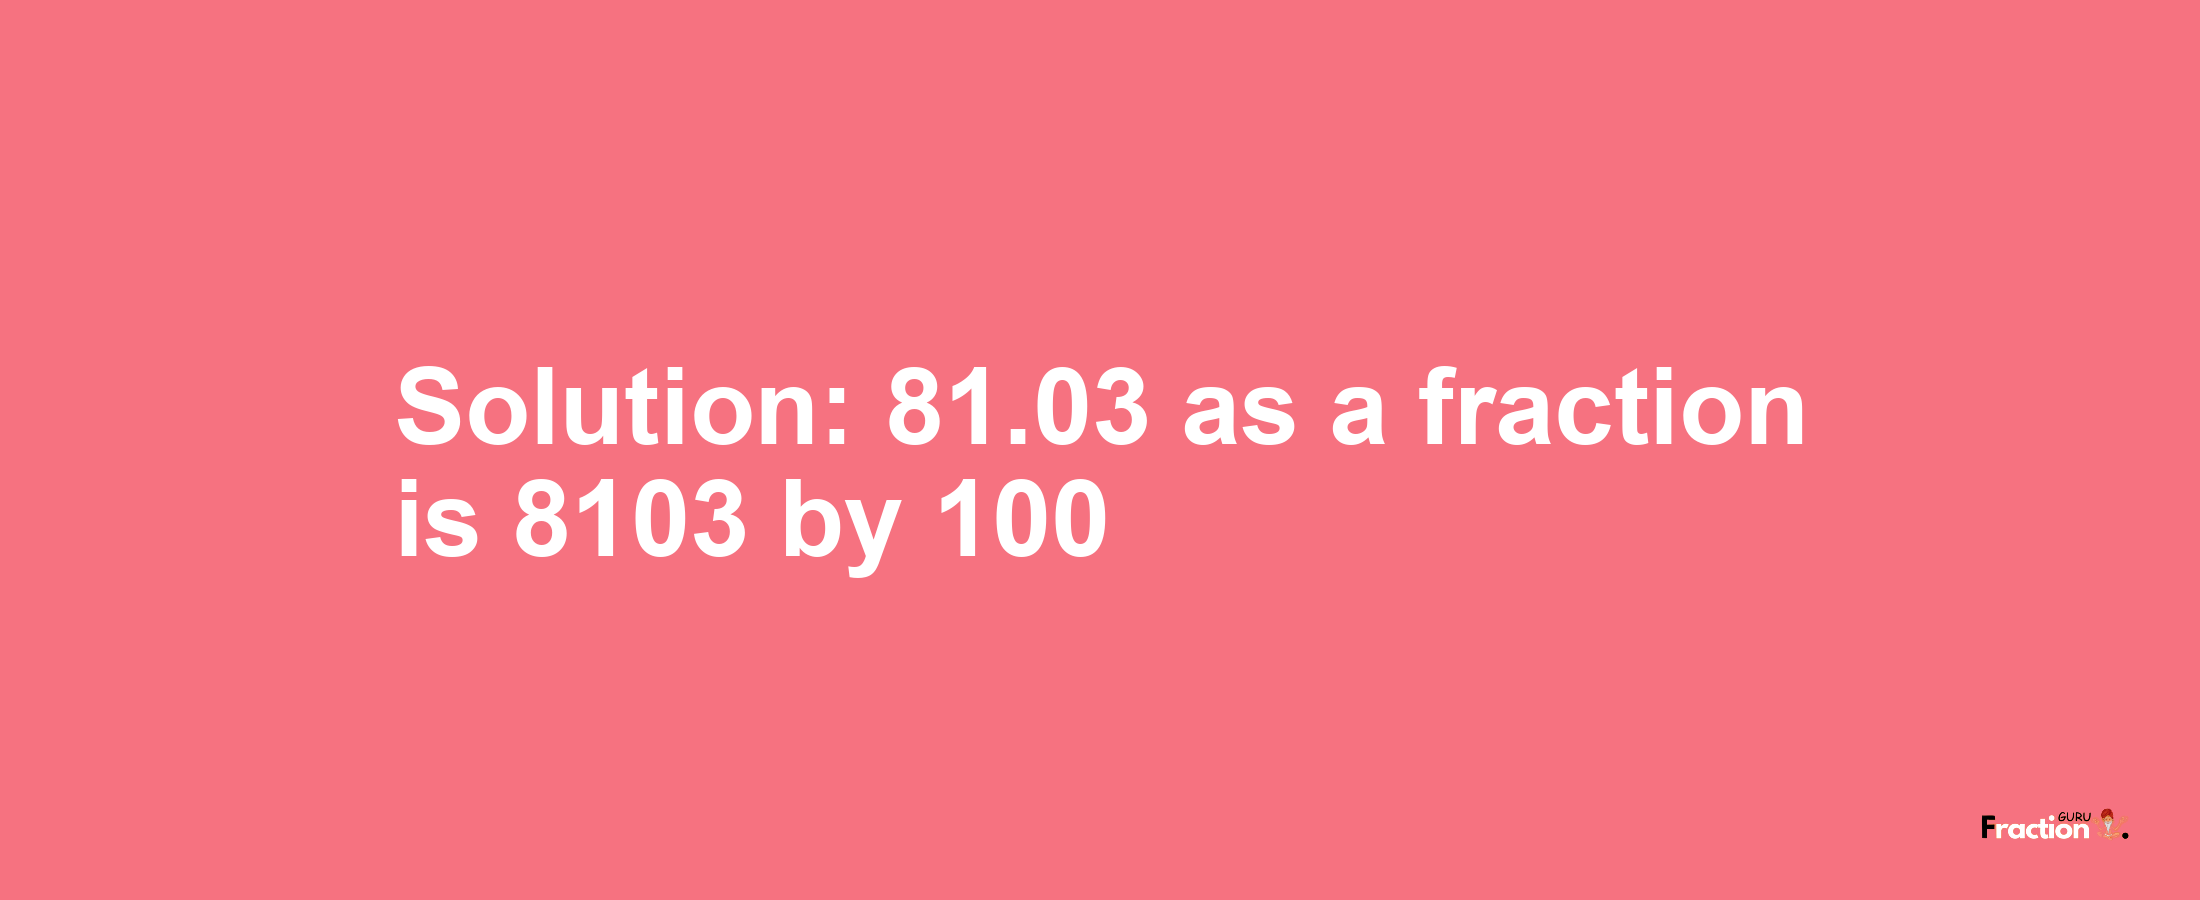 Solution:81.03 as a fraction is 8103/100